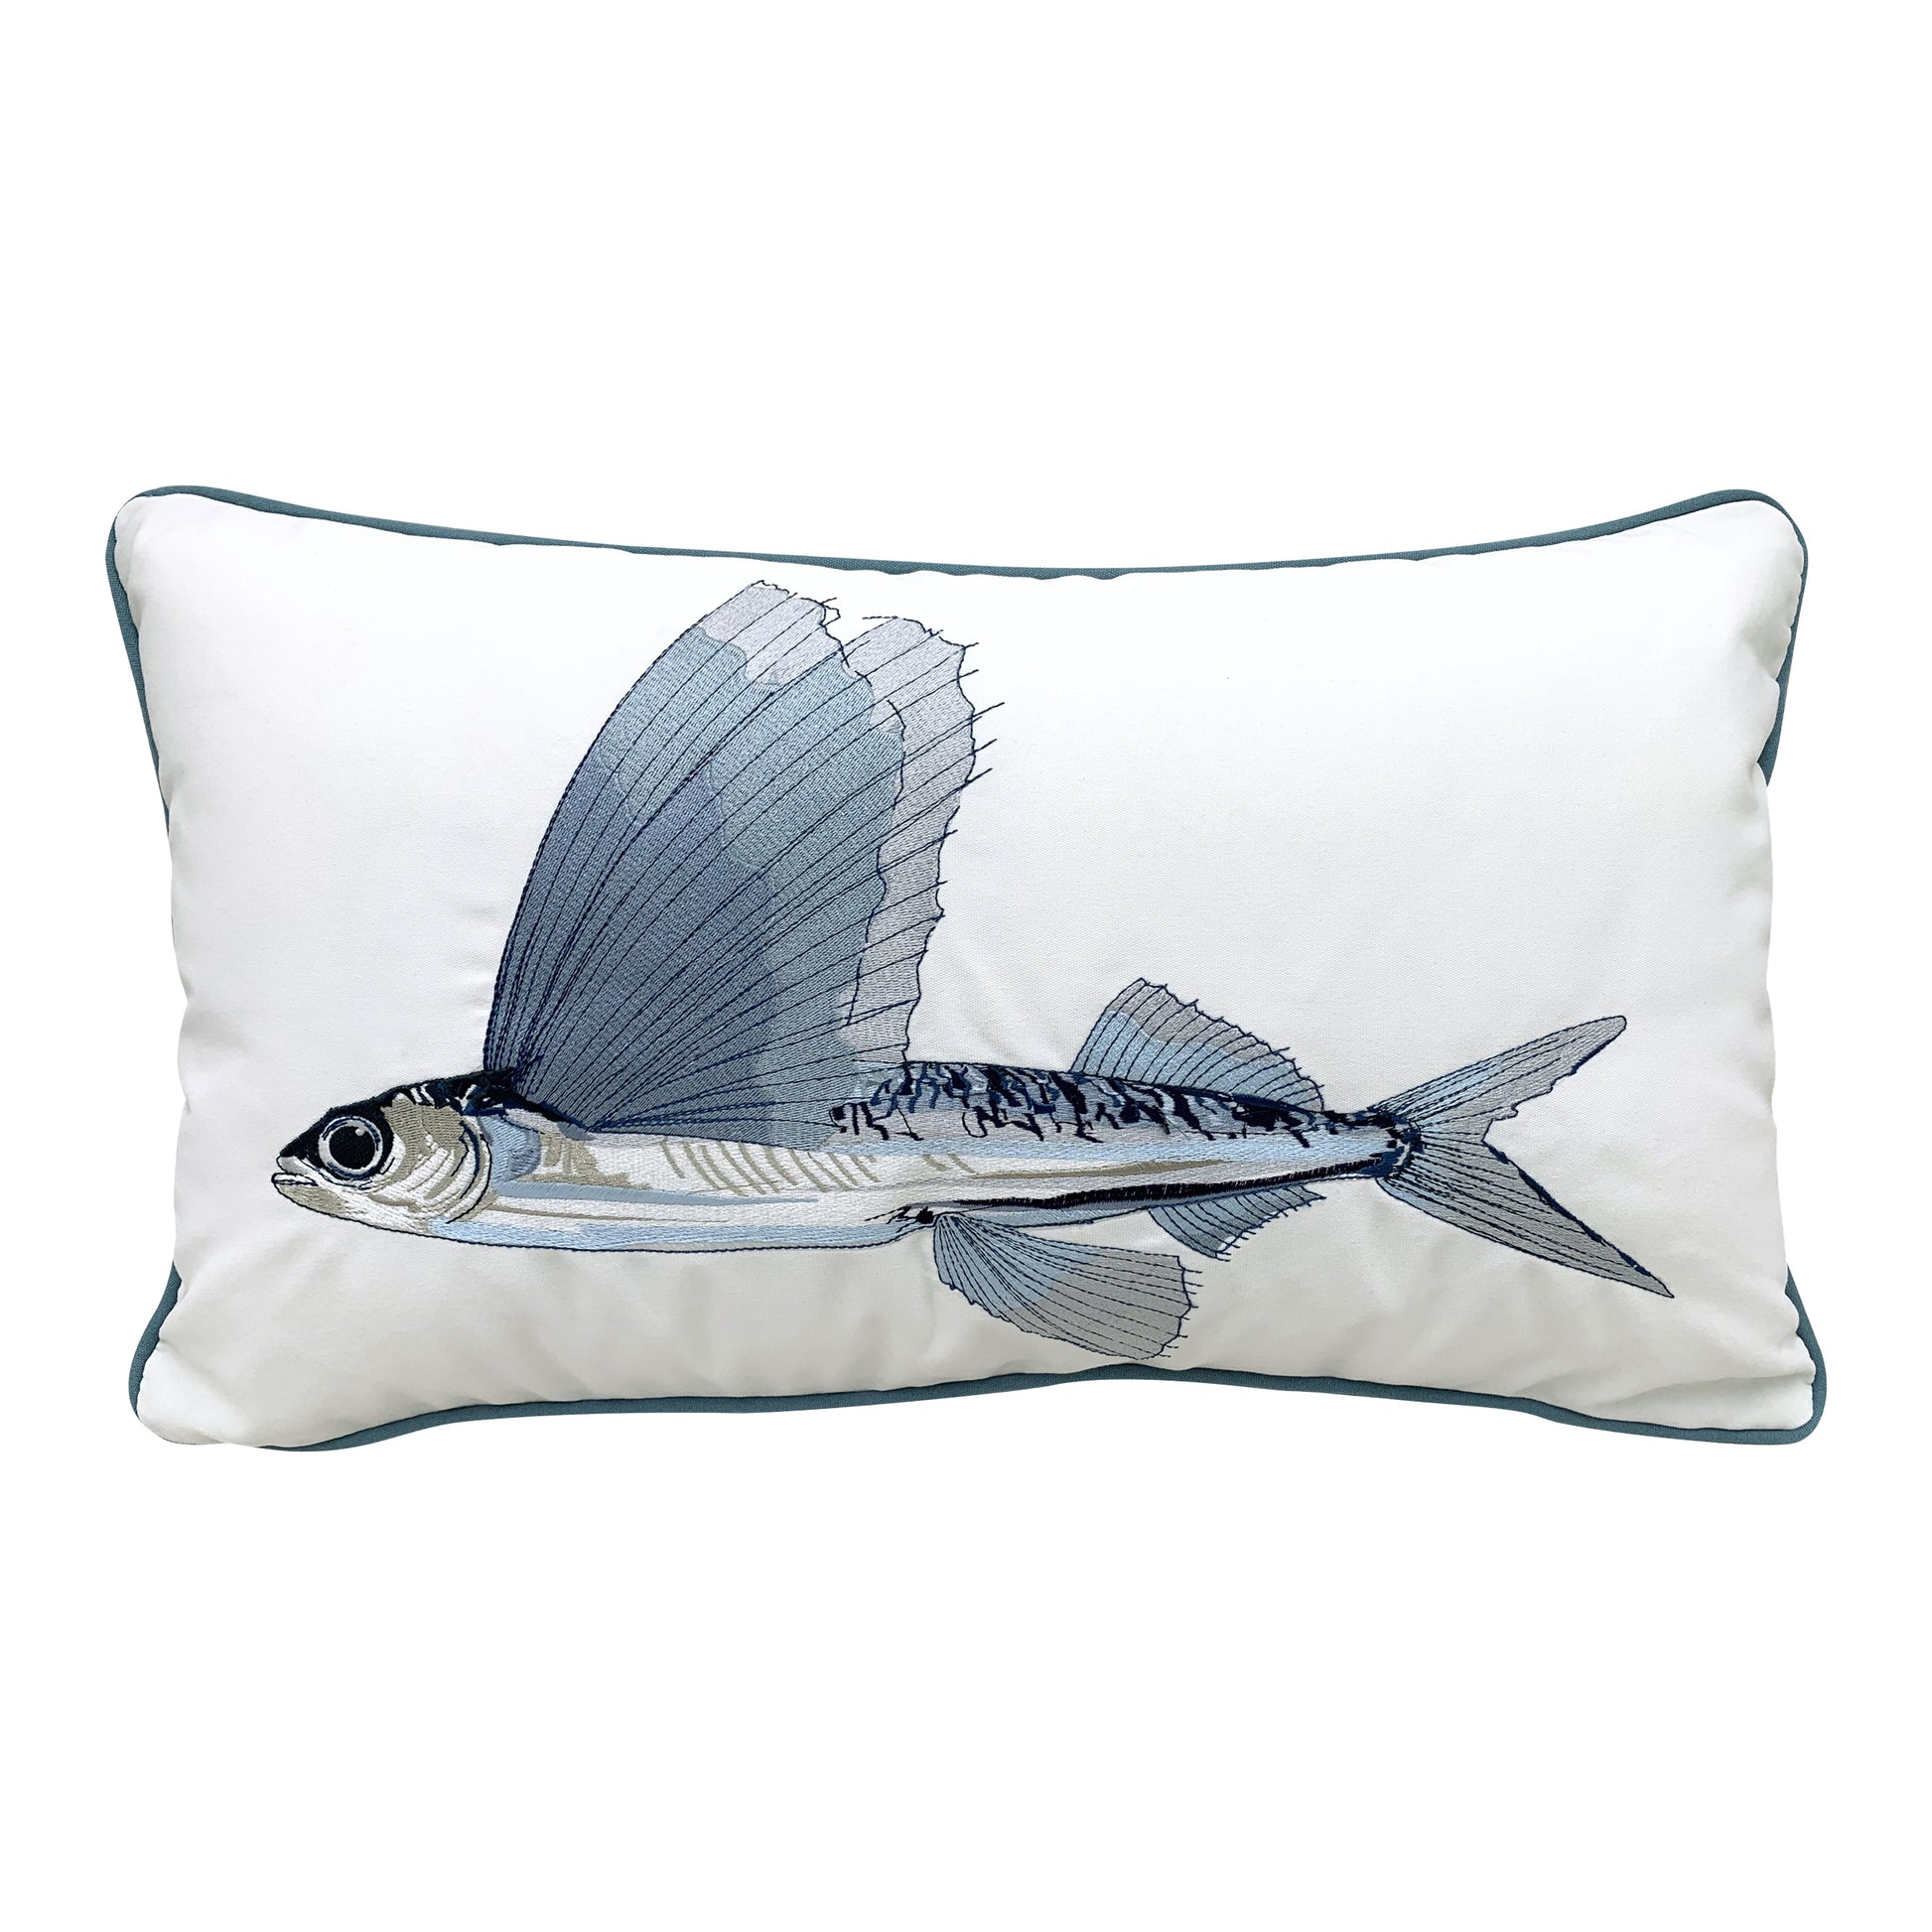 Flier fish embroidered on a white background pillow with a blue/grey piped edging. 